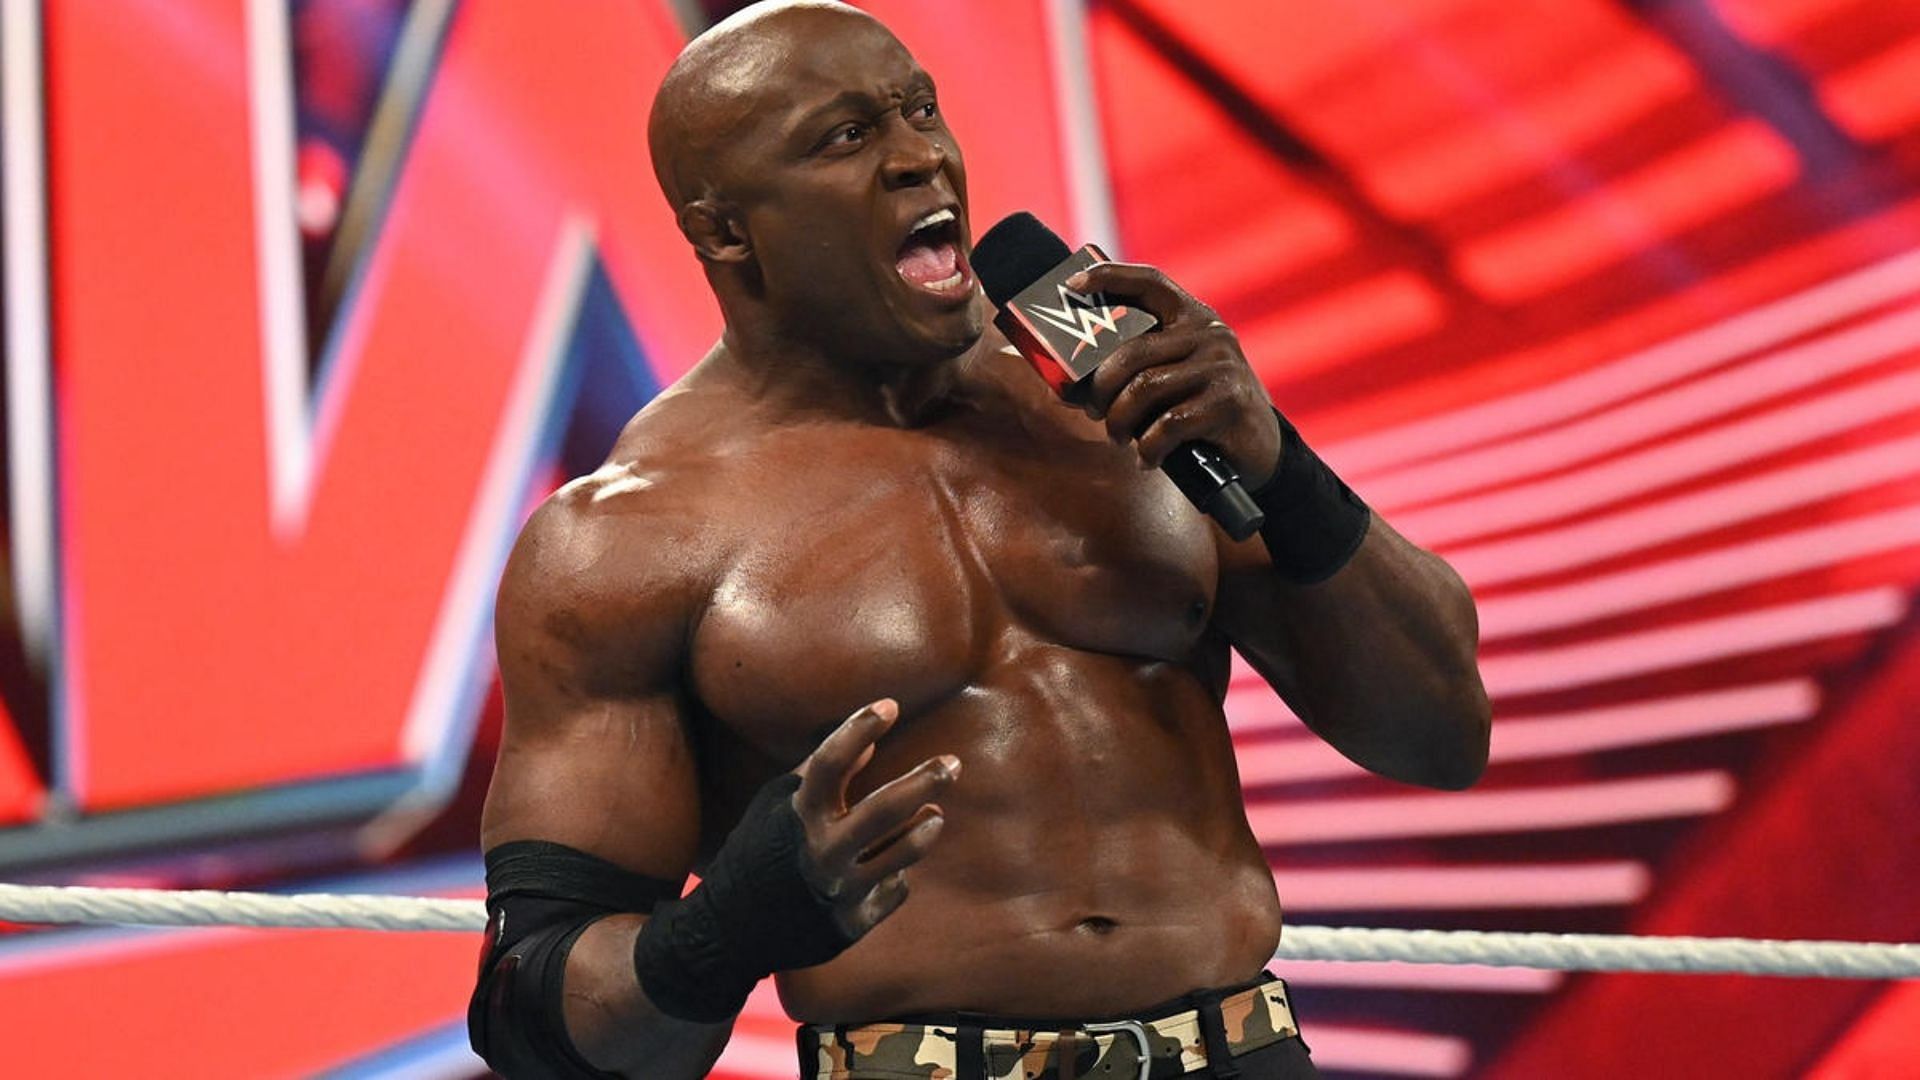 Bobby Lashley thrived as a member of The Hurt Business